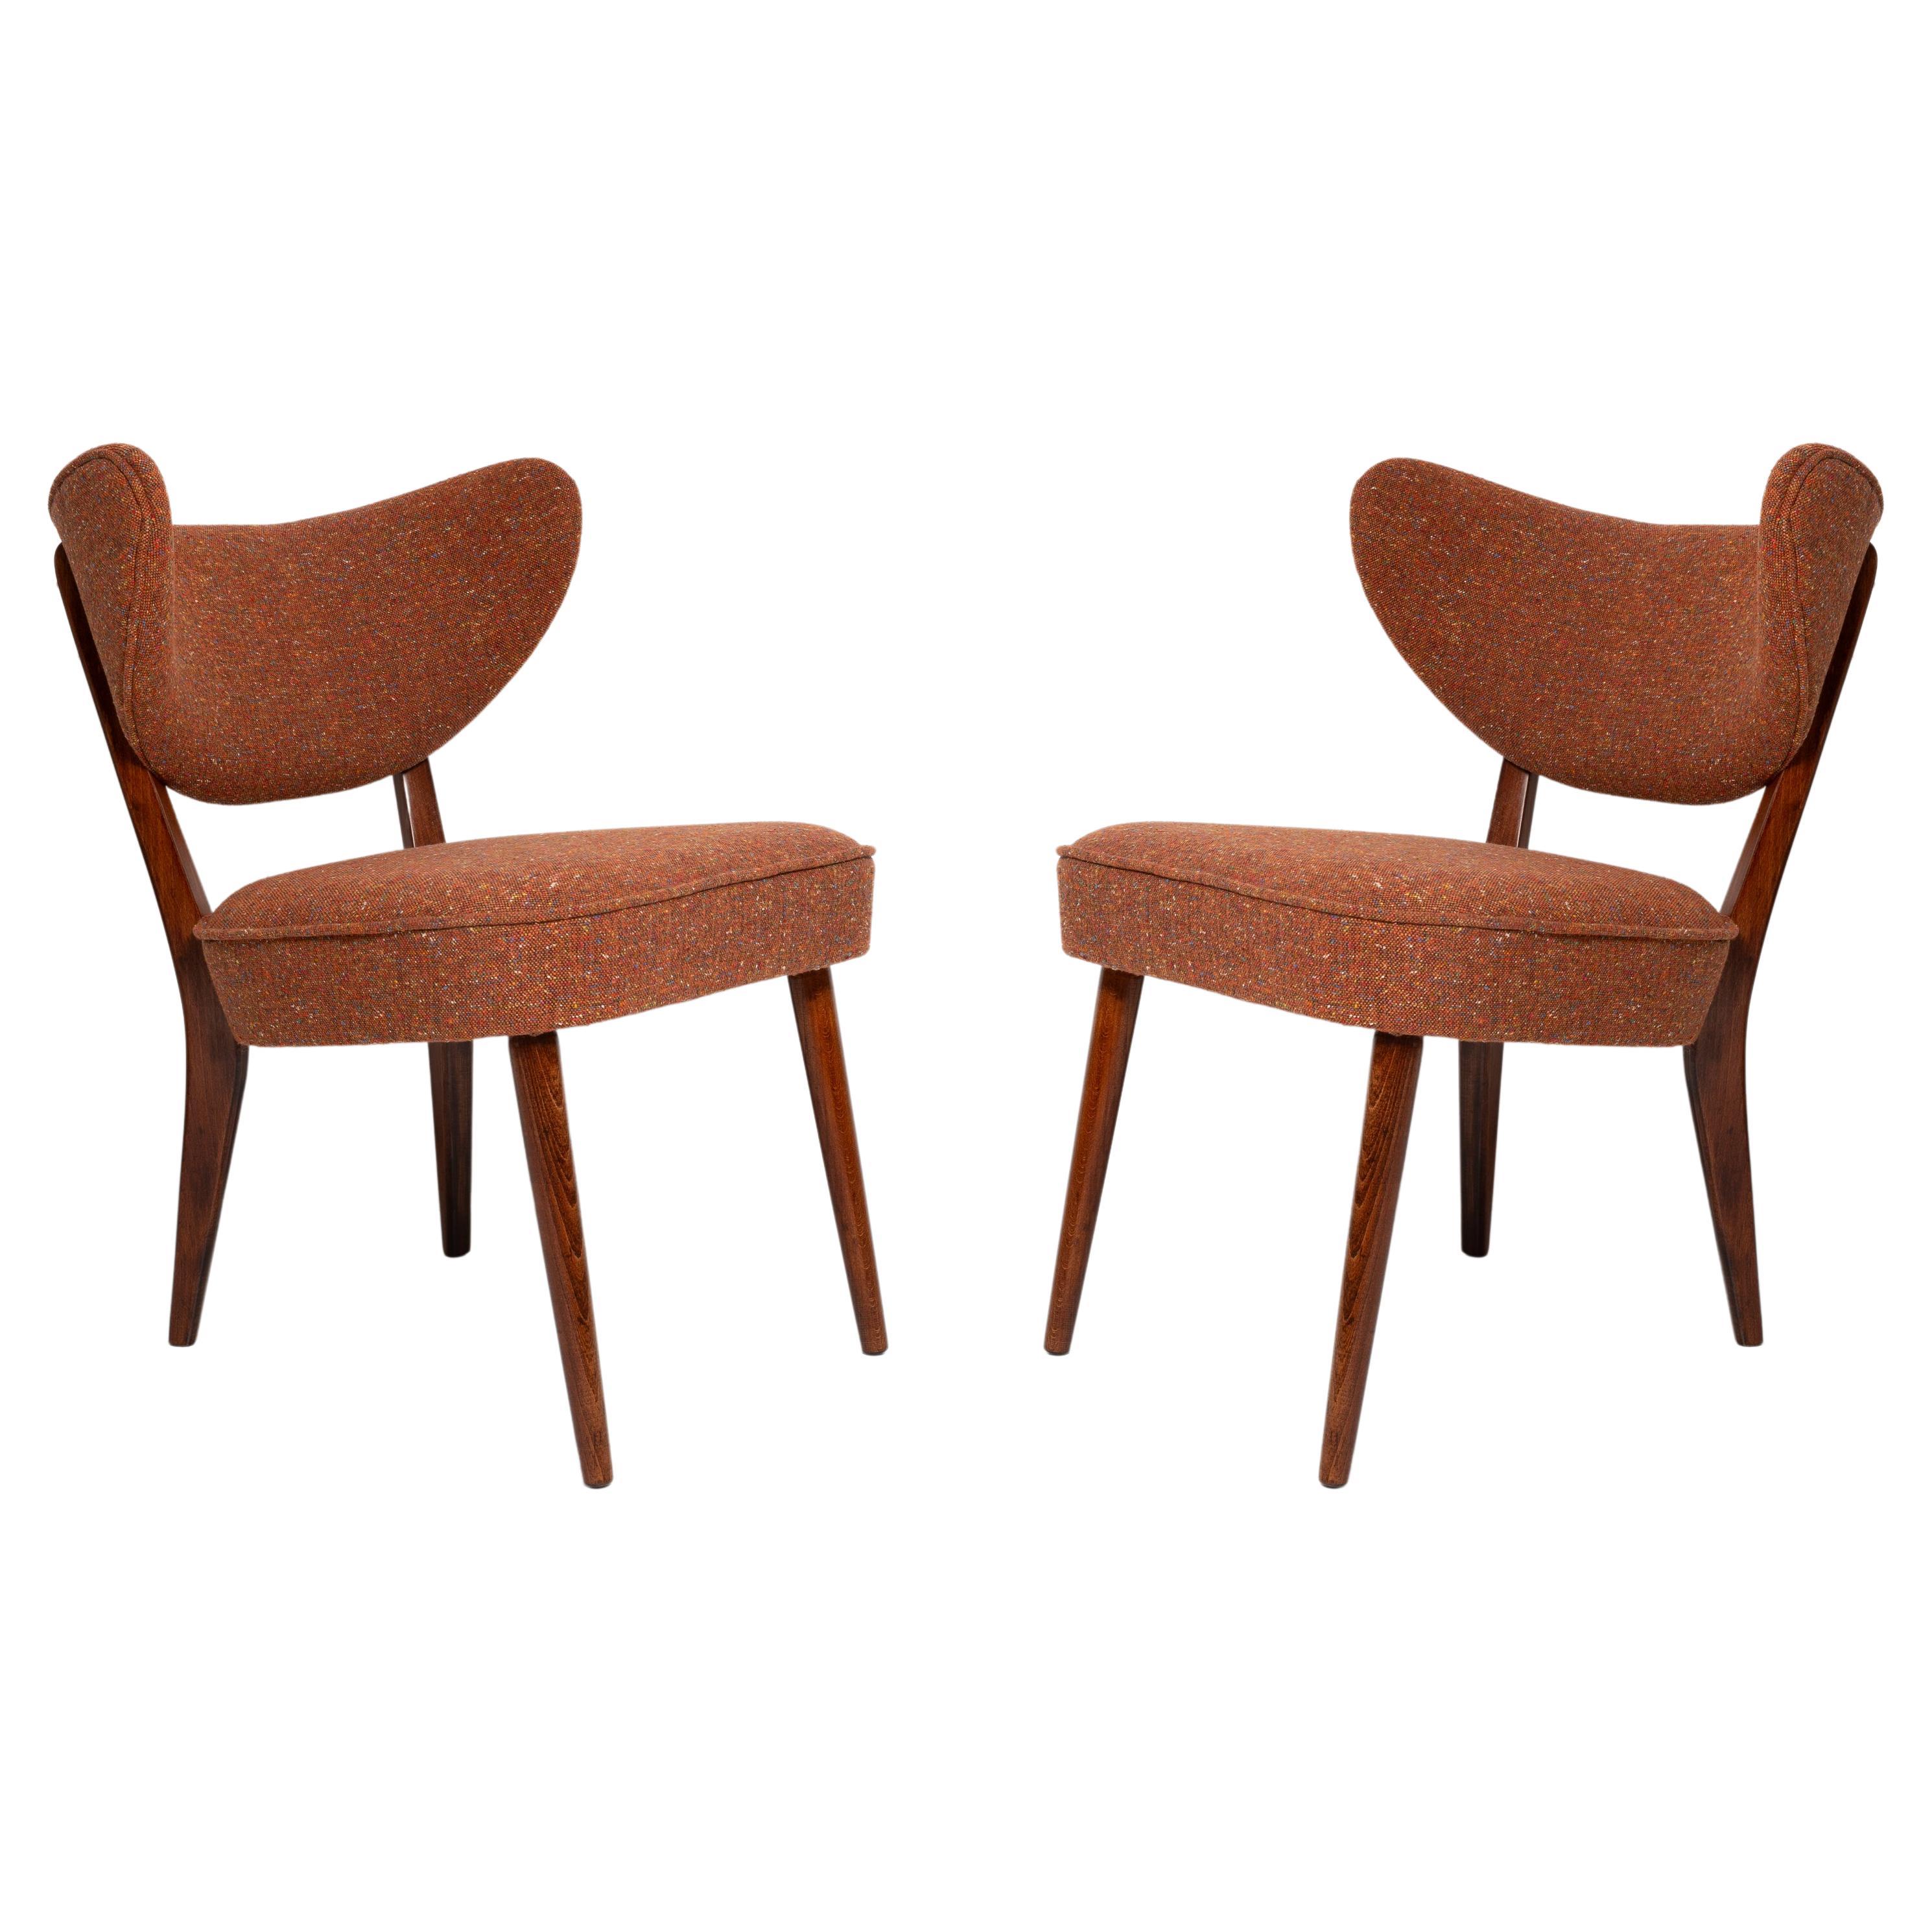 Pair of Orange Wool Shell Club Chairs, by Vintola Studio, Europe, Poland